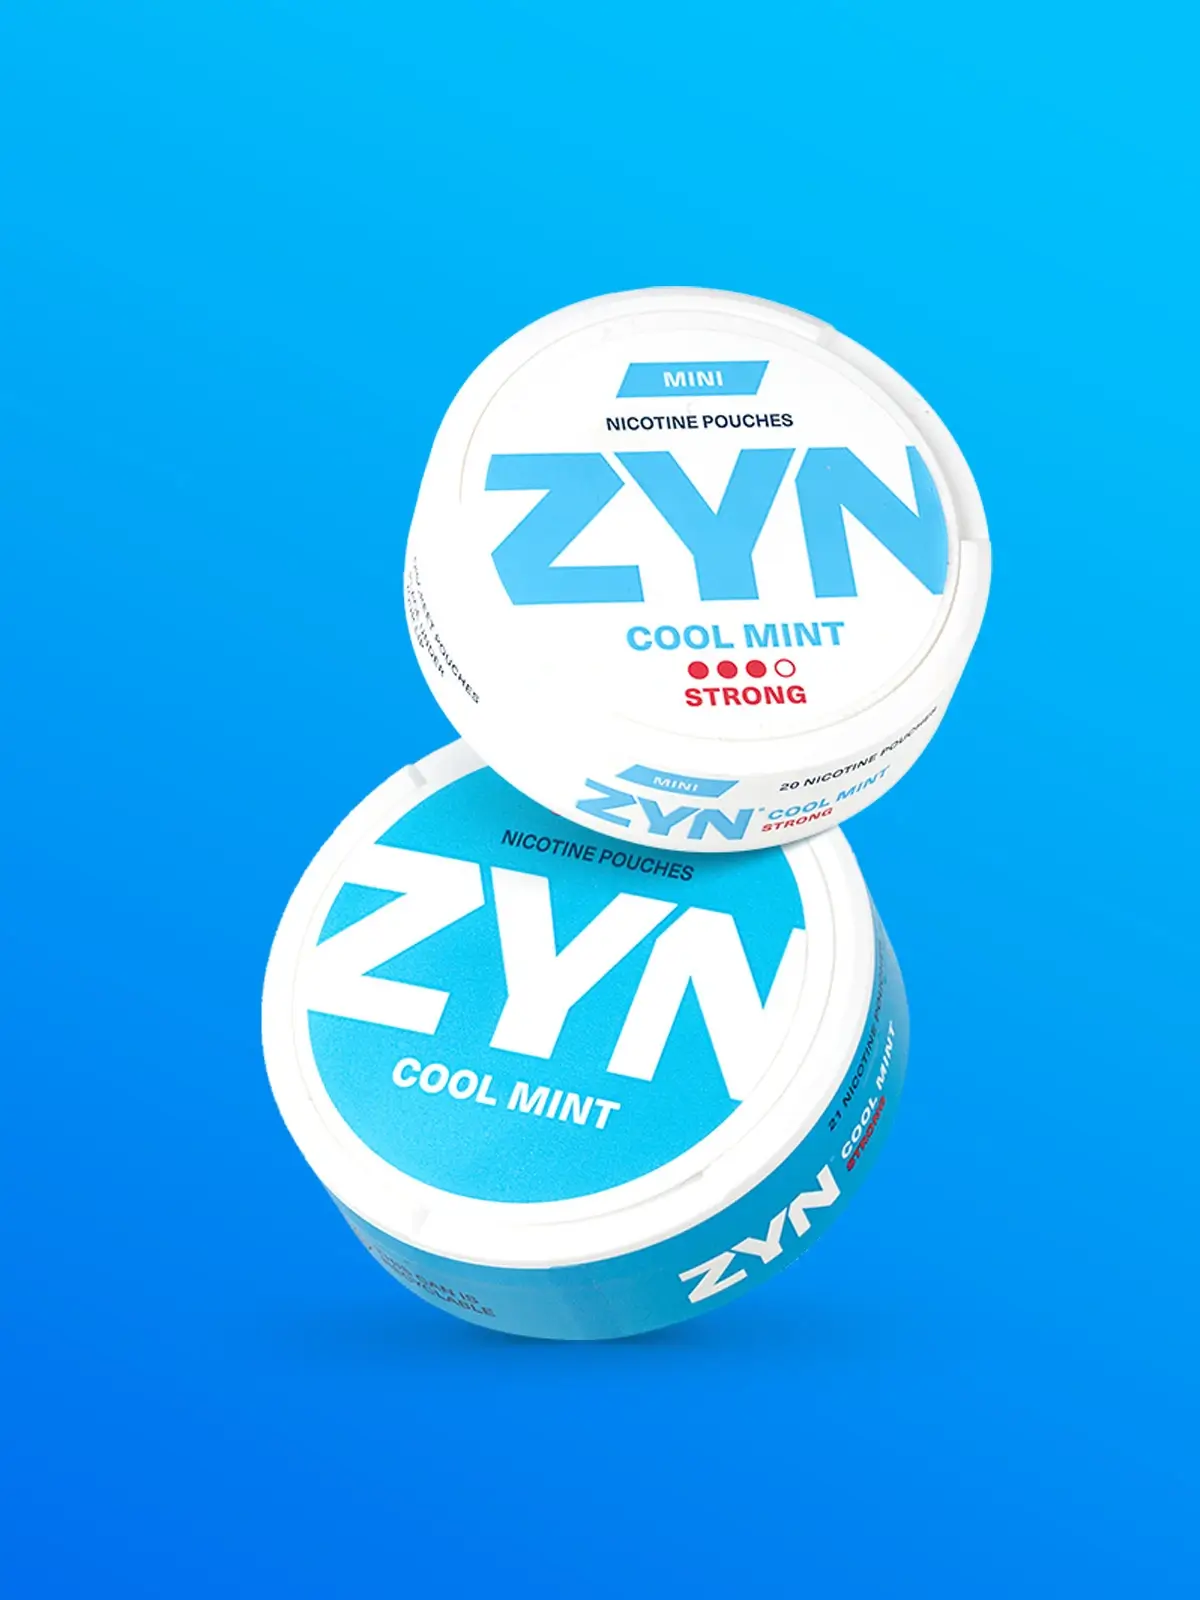 Two packs of ZYN nicotine pouches floating in front of a blue background